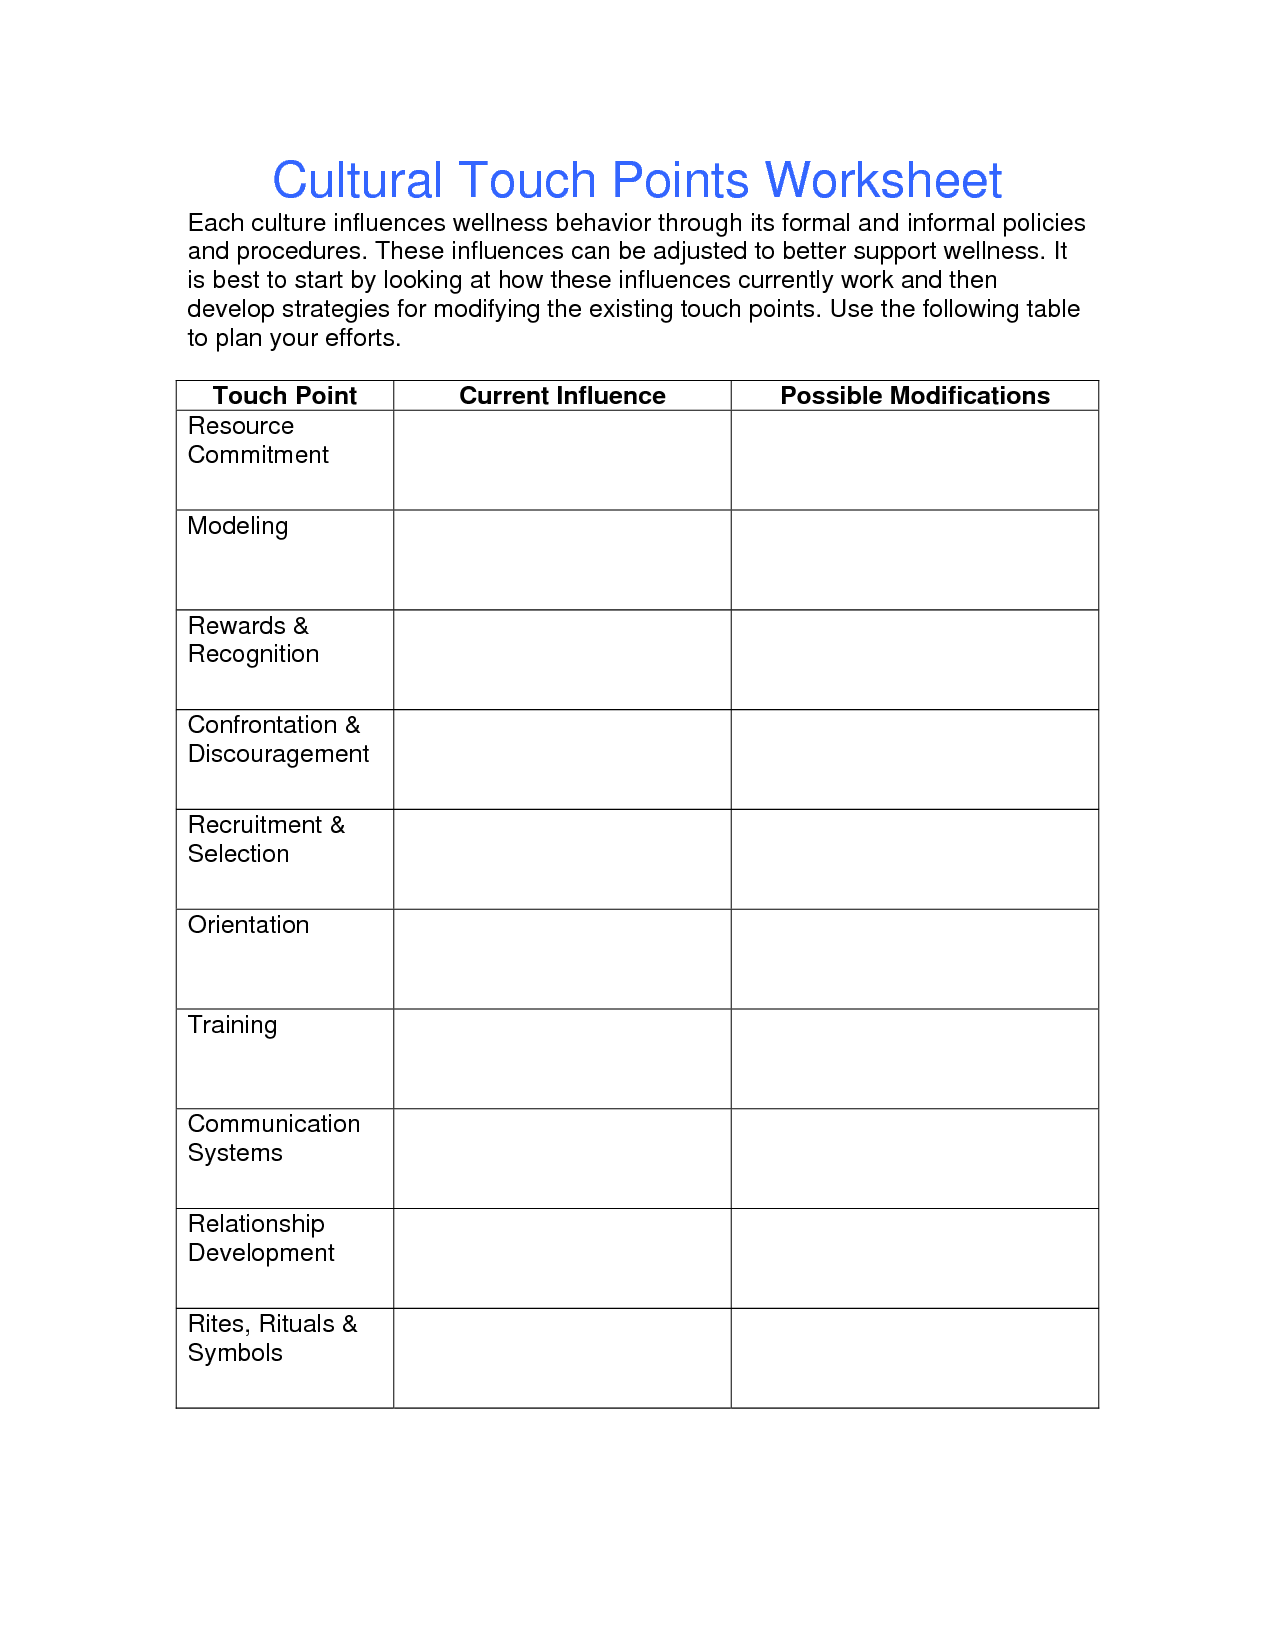 Health and Wellness Worksheets Image